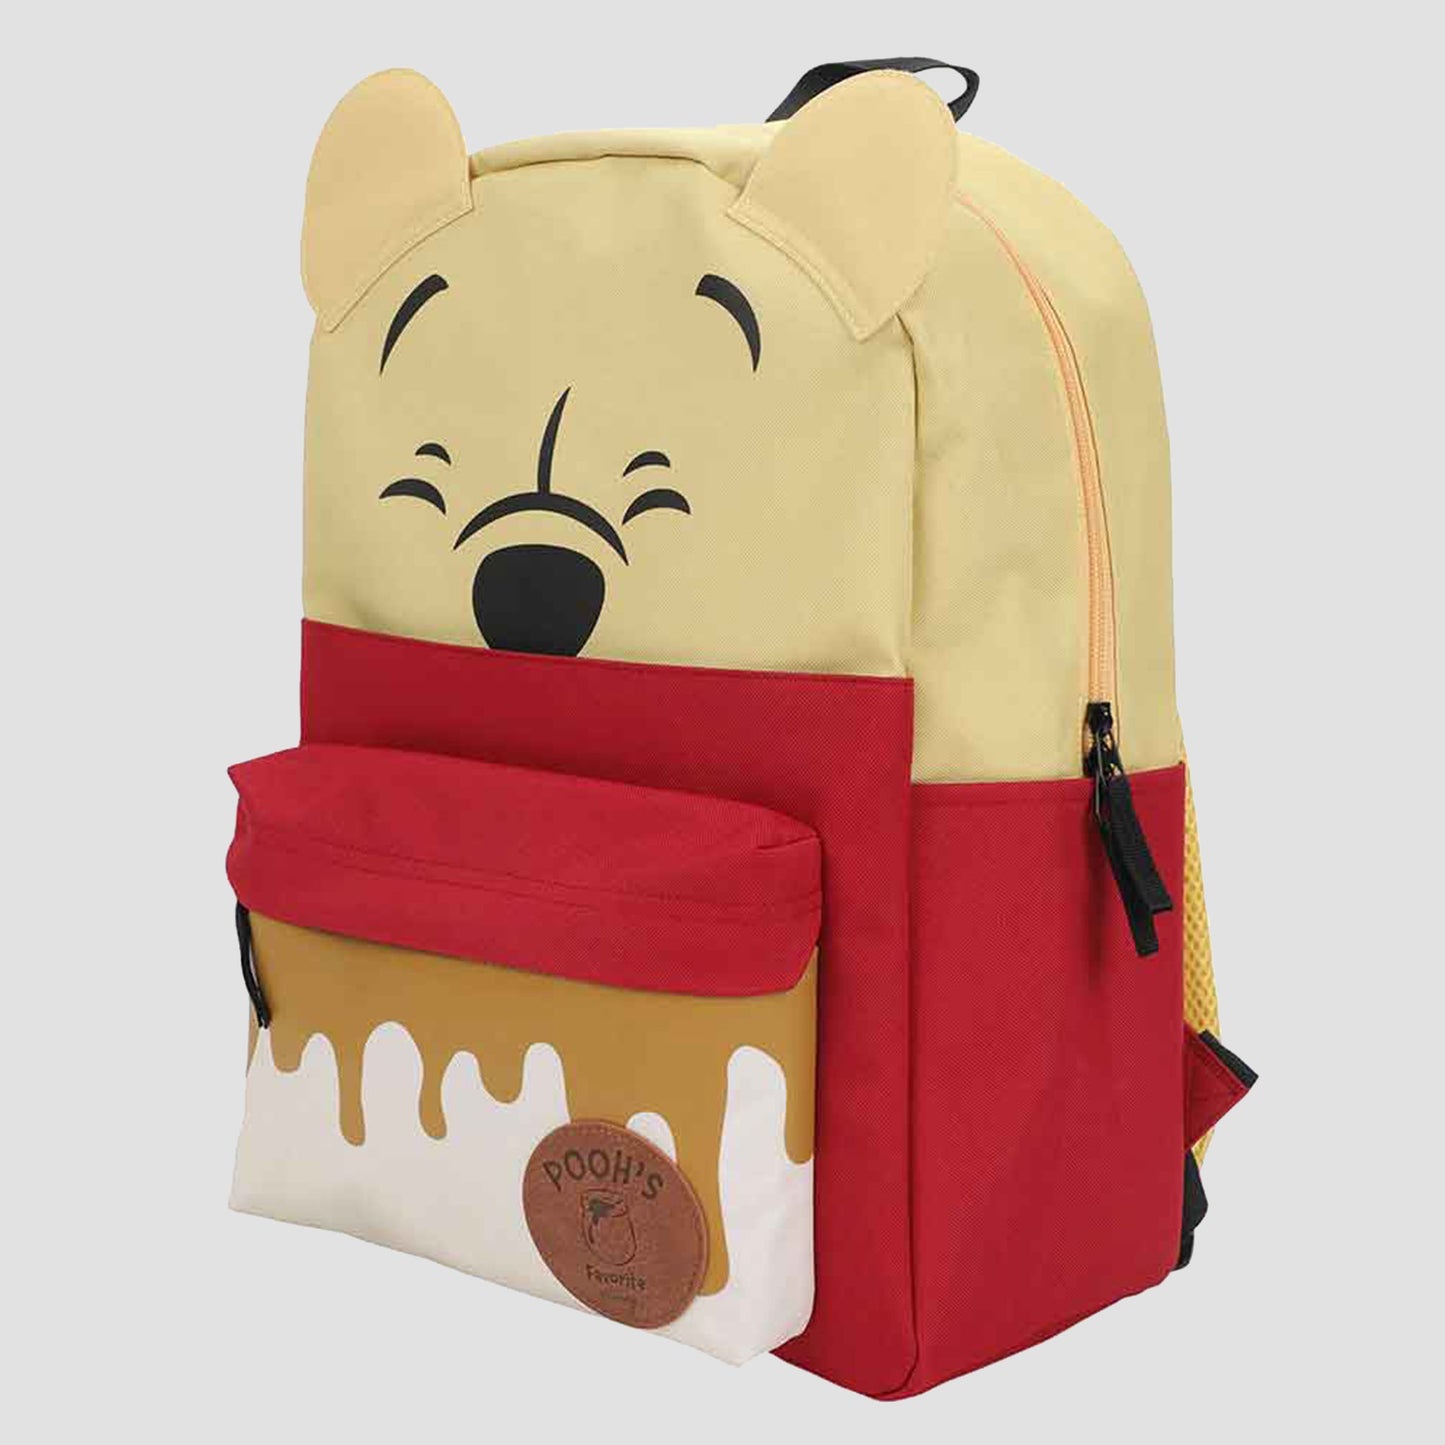 Pooh (Winnie the Pooh) 3D Hunny Pot Laptop Backpack